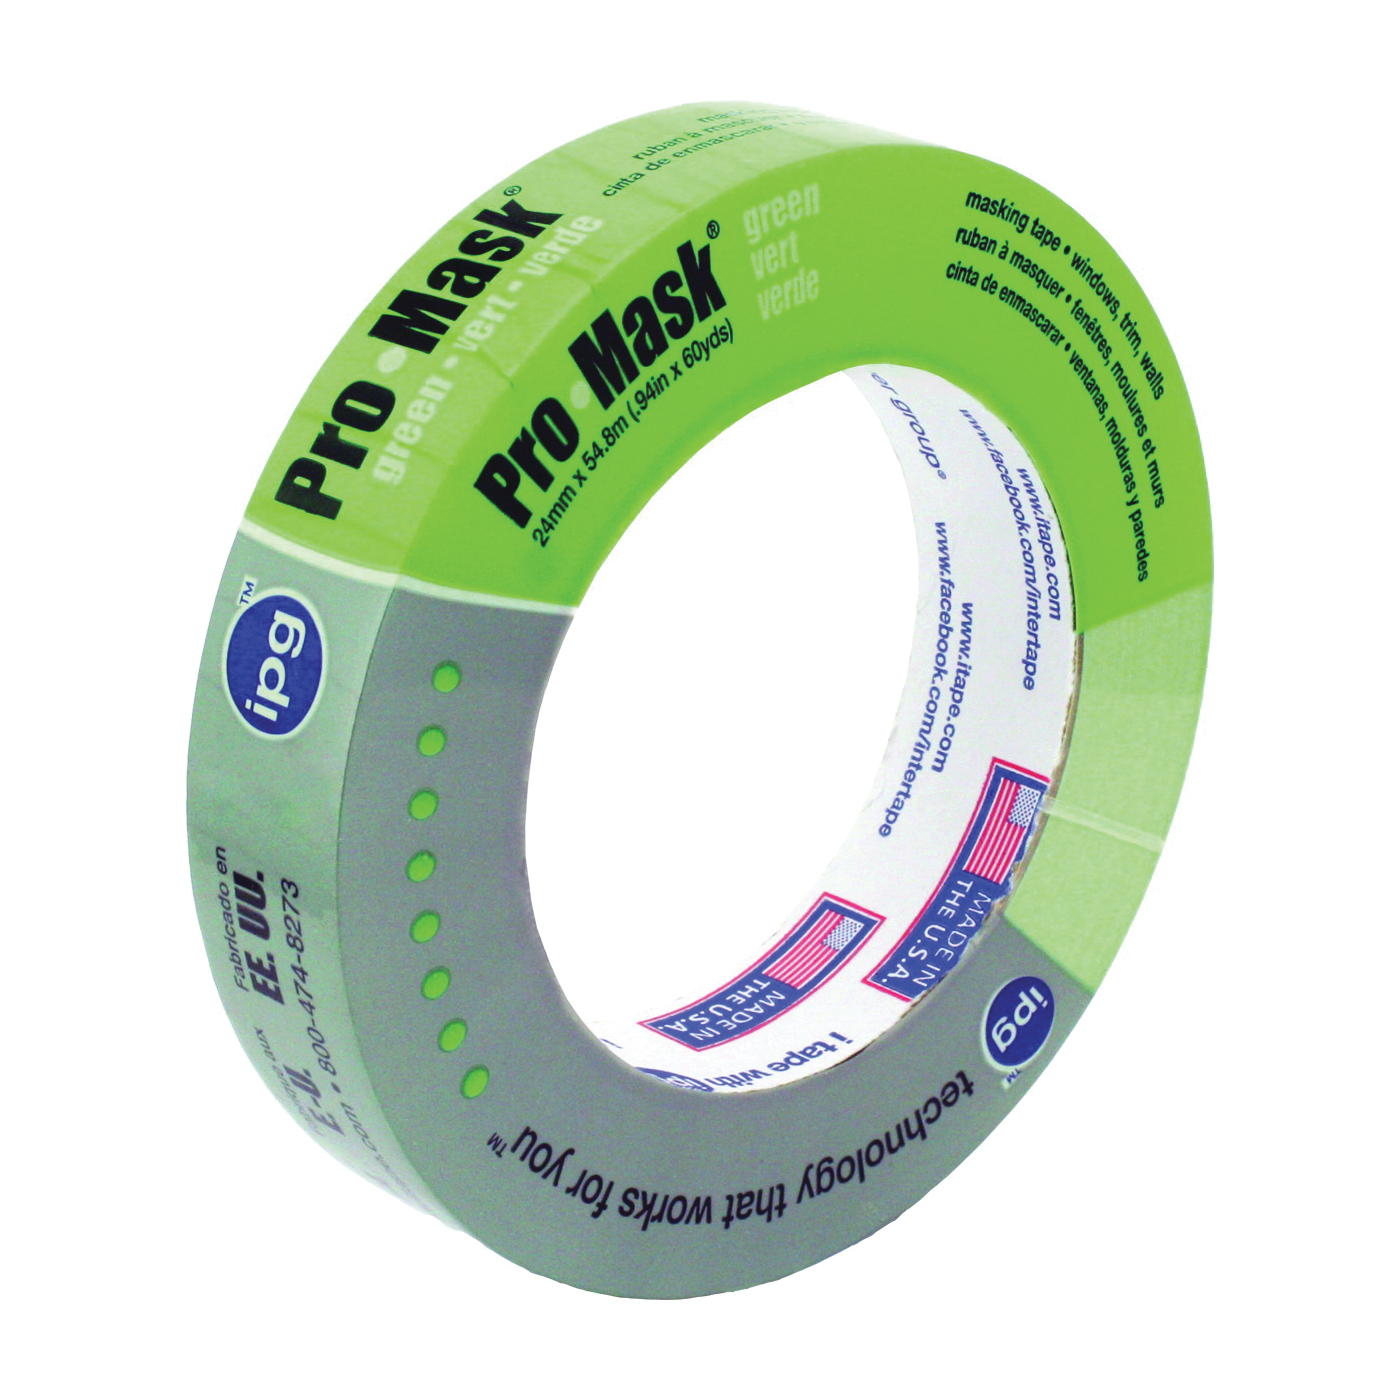 5803-1 Masking Tape, 60 yd L, 0.94 in W, Crepe Paper Backing, Light Green